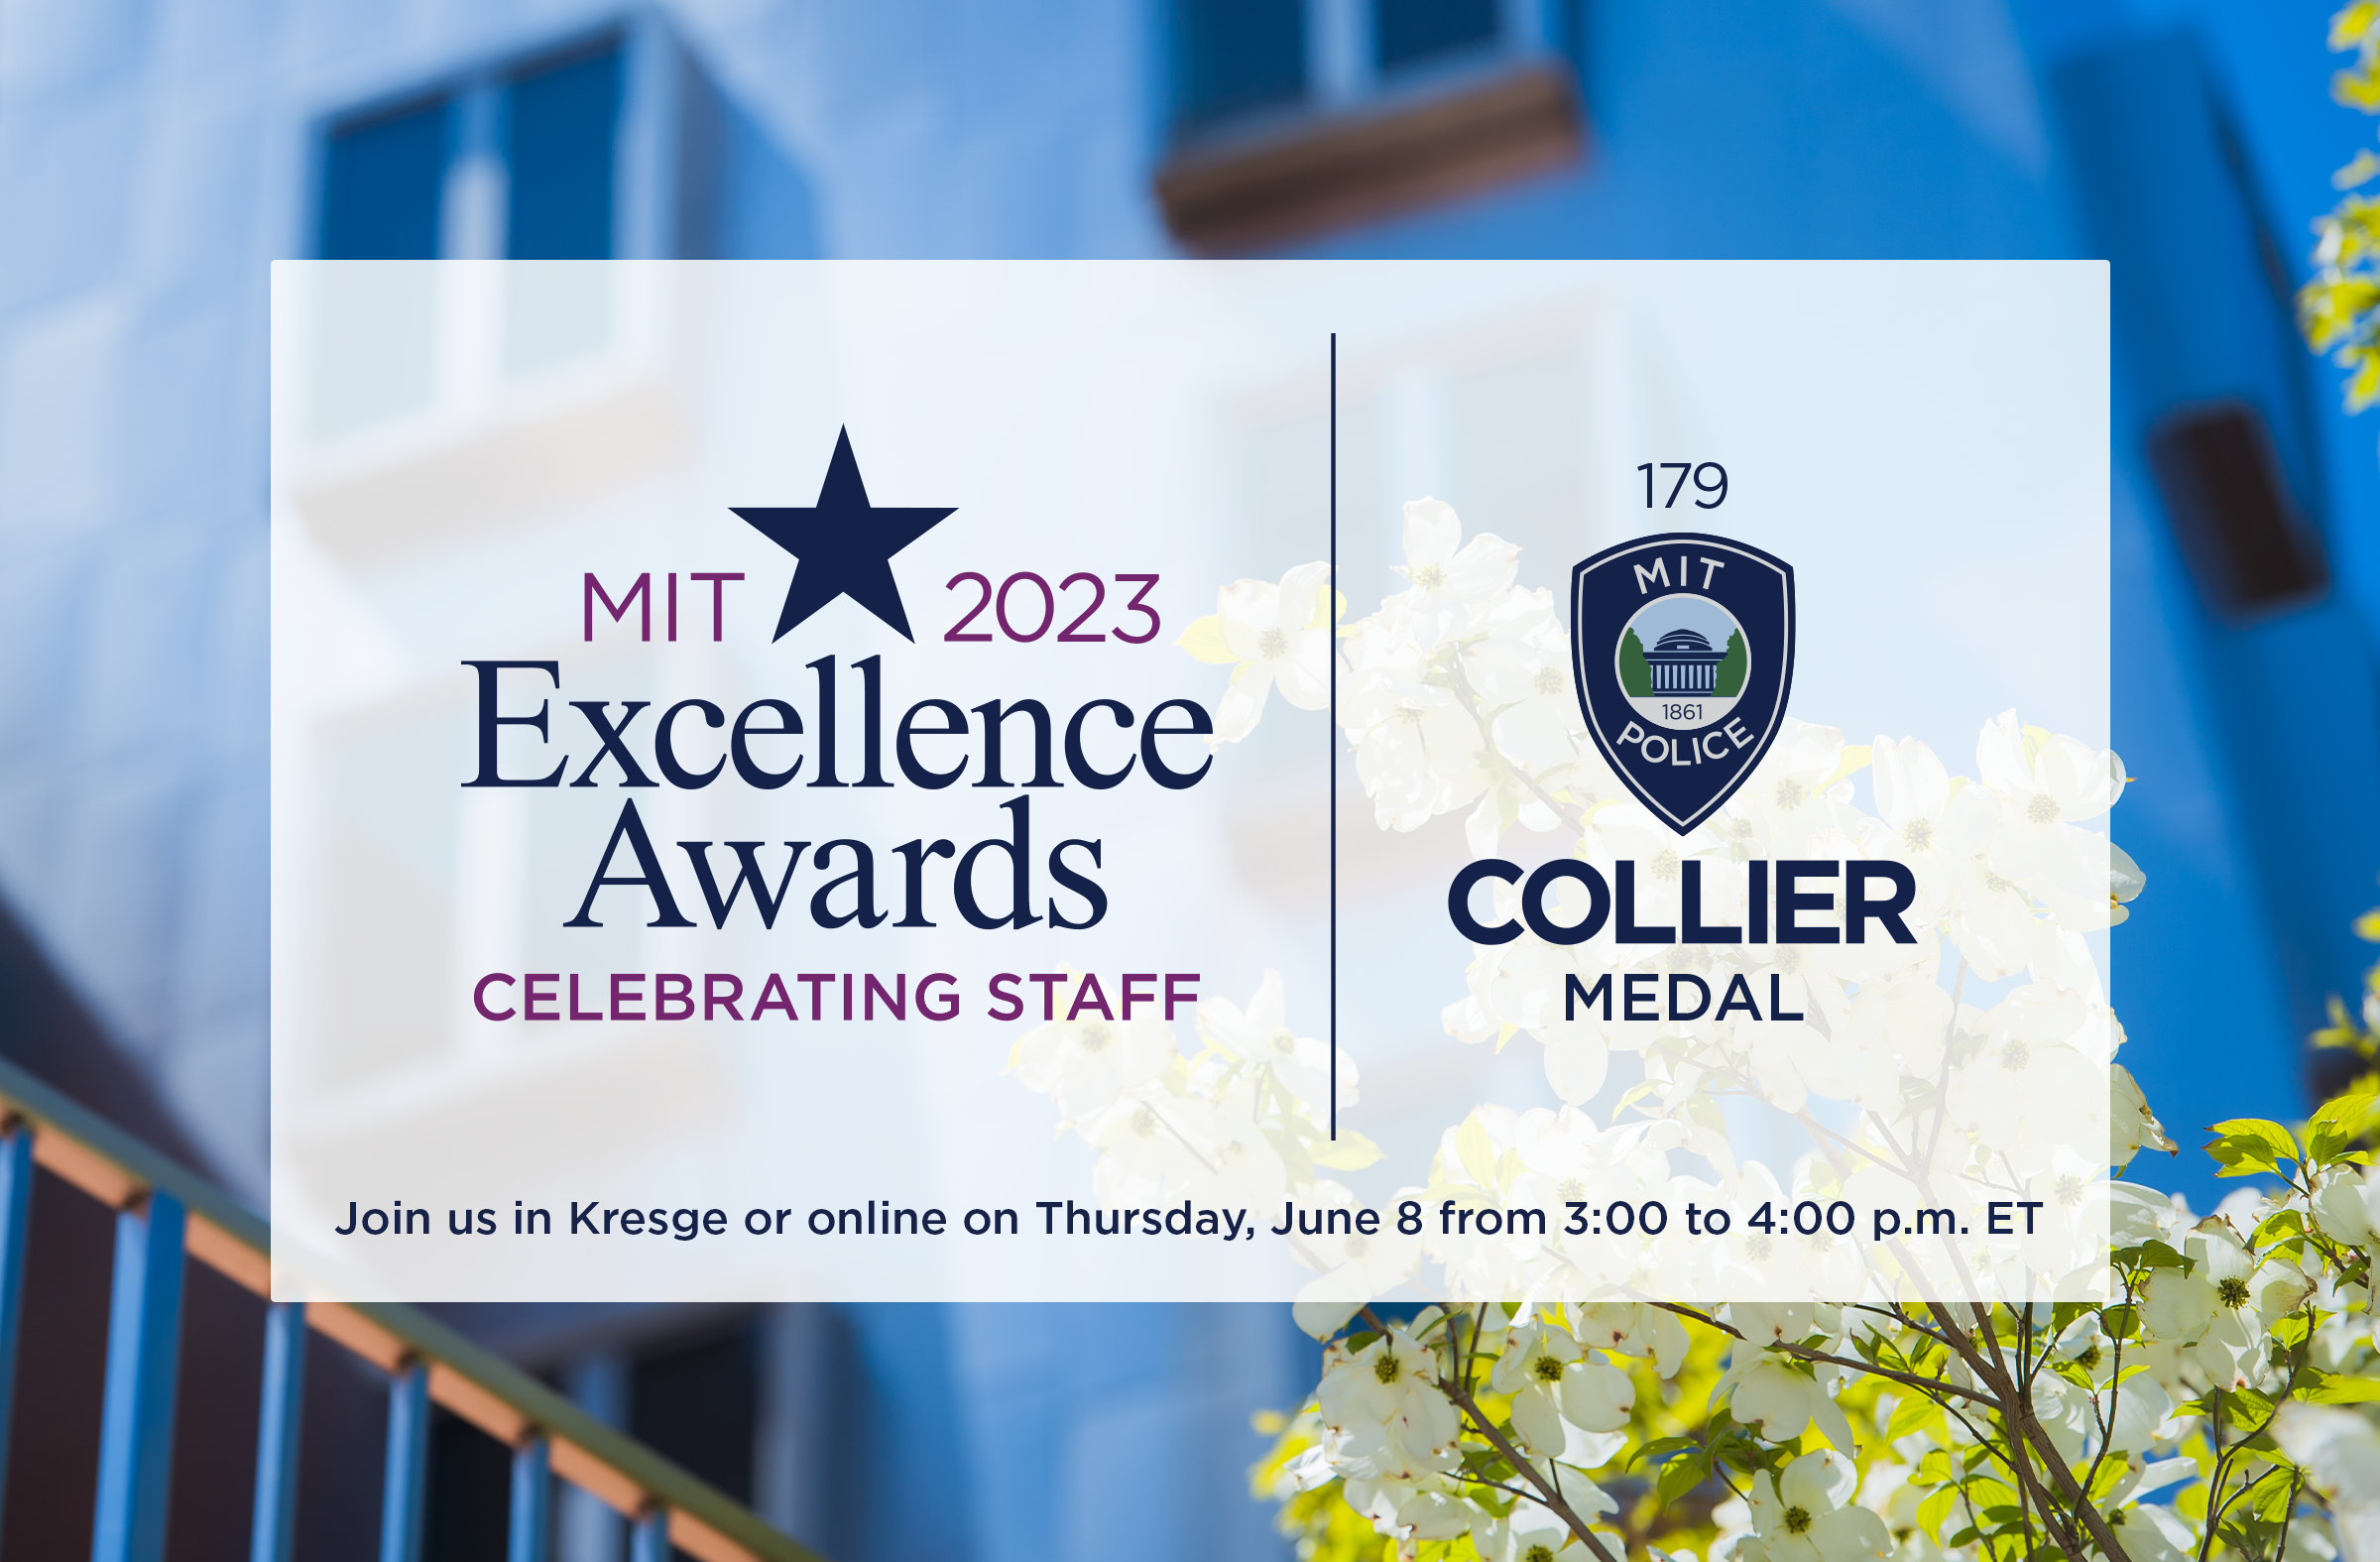 Join us on June 8 for the 2023 MIT Excellence Award and Collier Medal Awards